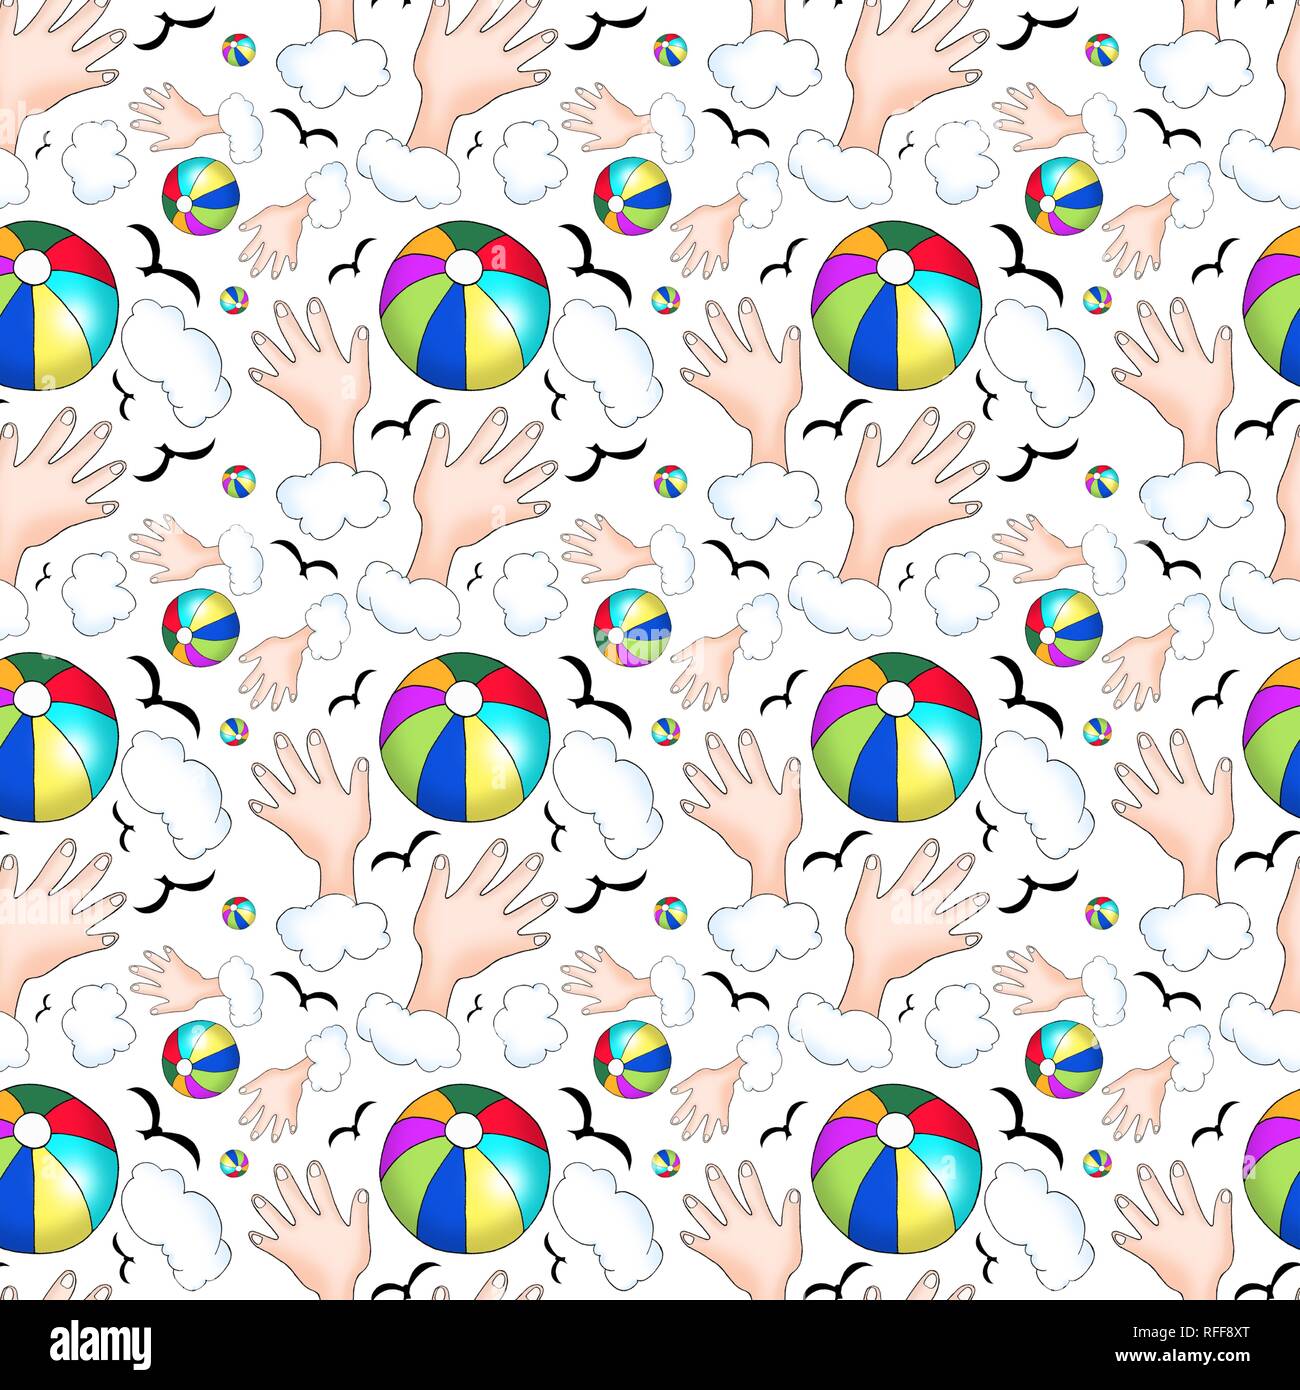 Wrapping paper, wallpaper, seamless pattern, colorful beach ball, hands, clouds and birds, background white, Germany Stock Photo